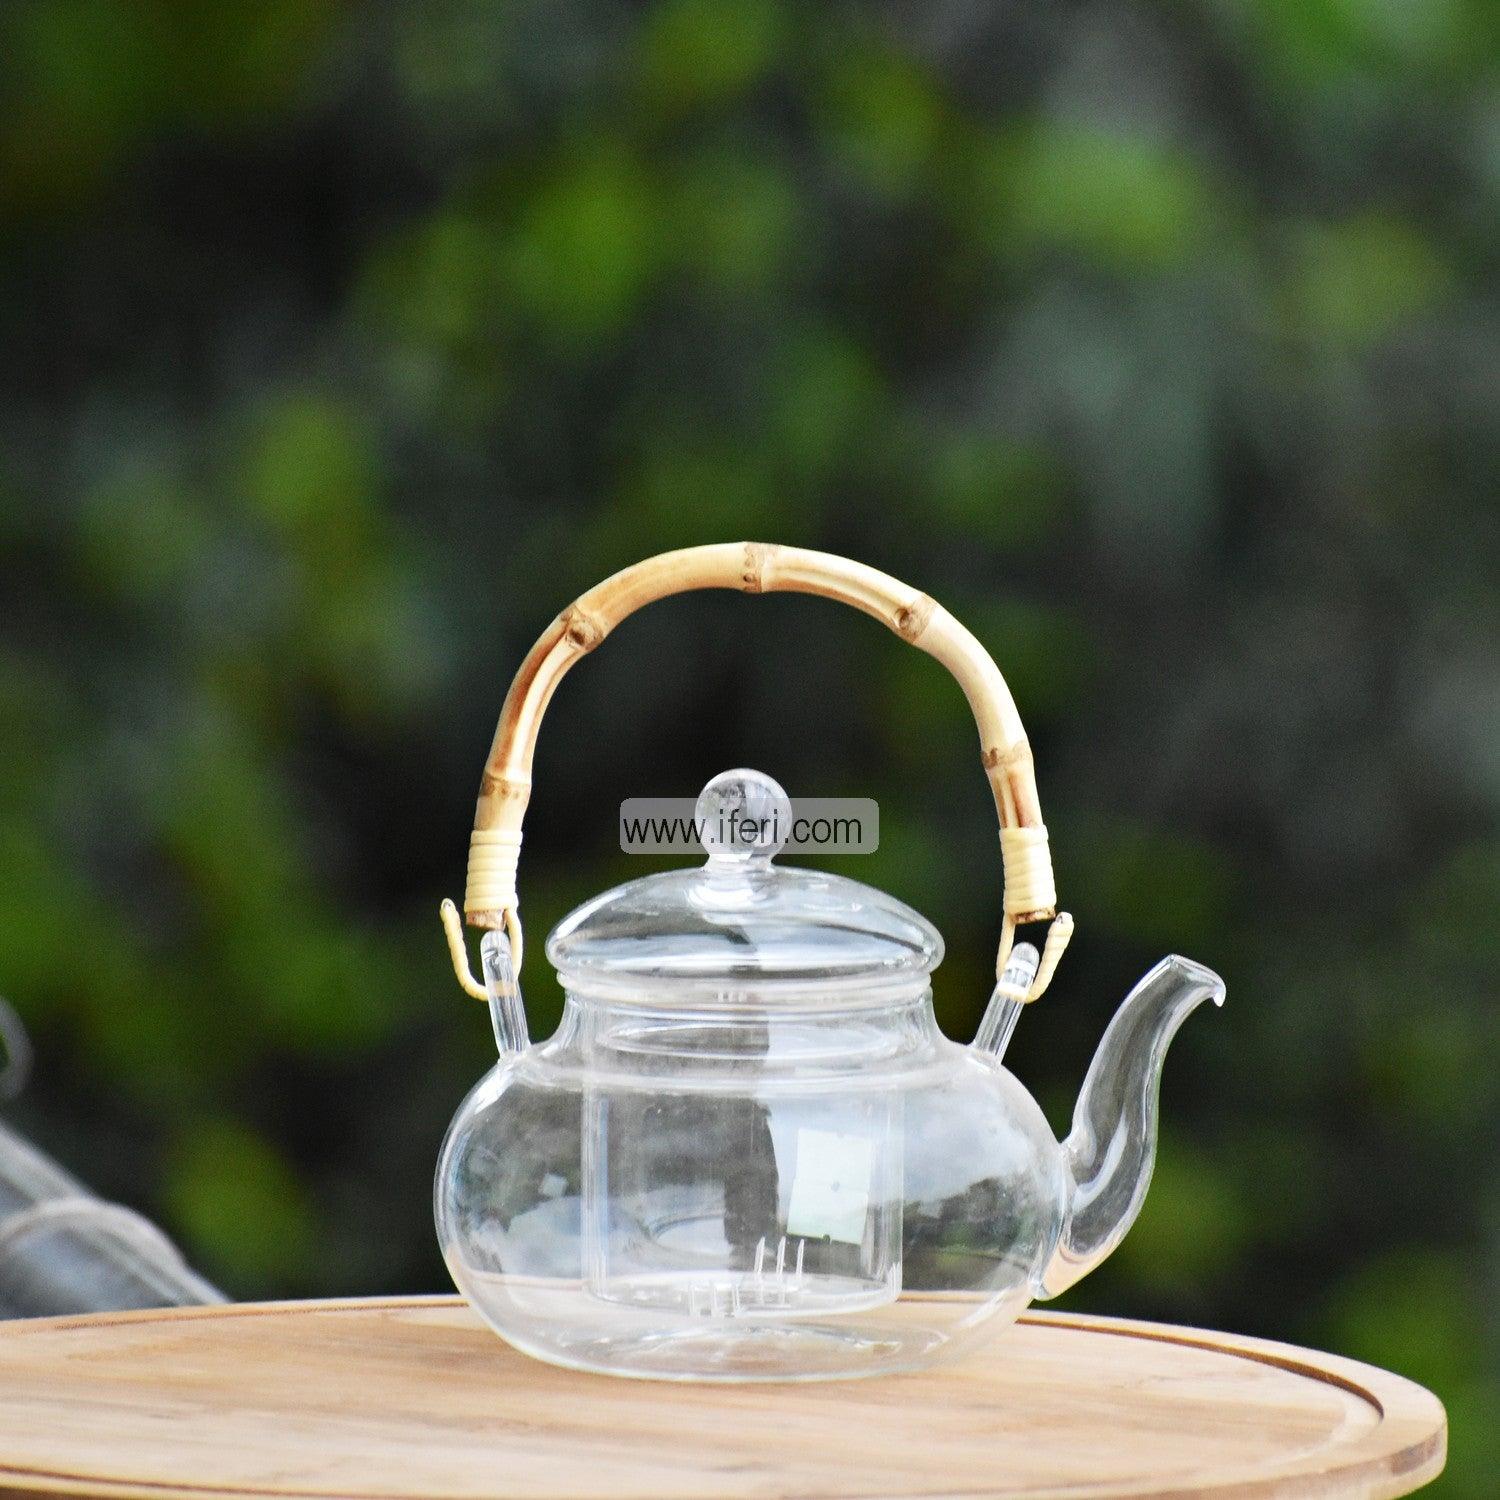 3.5 Inch Tempered Glass Tea Pot with Infuser RY0143 Price in Bangladesh - iferi.com